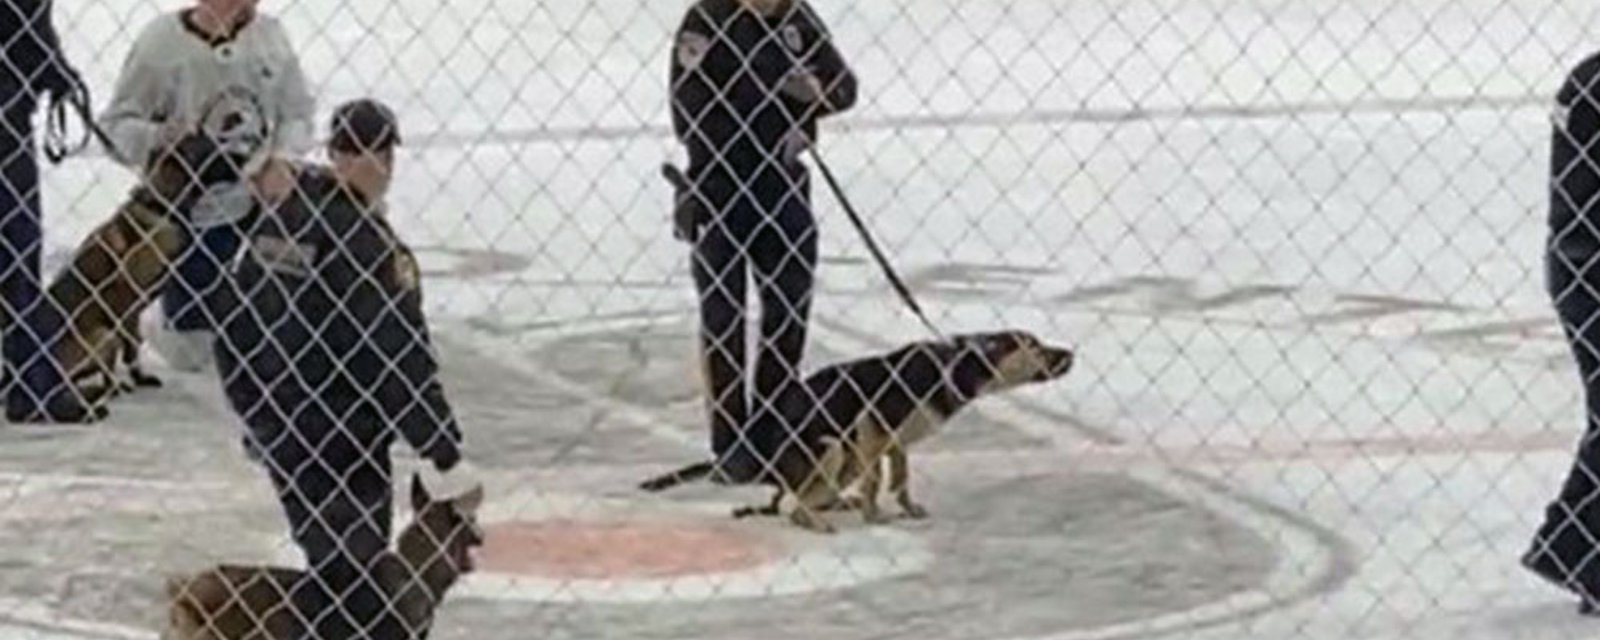 Philly police dog takes a dump on Flyers logo at center ice